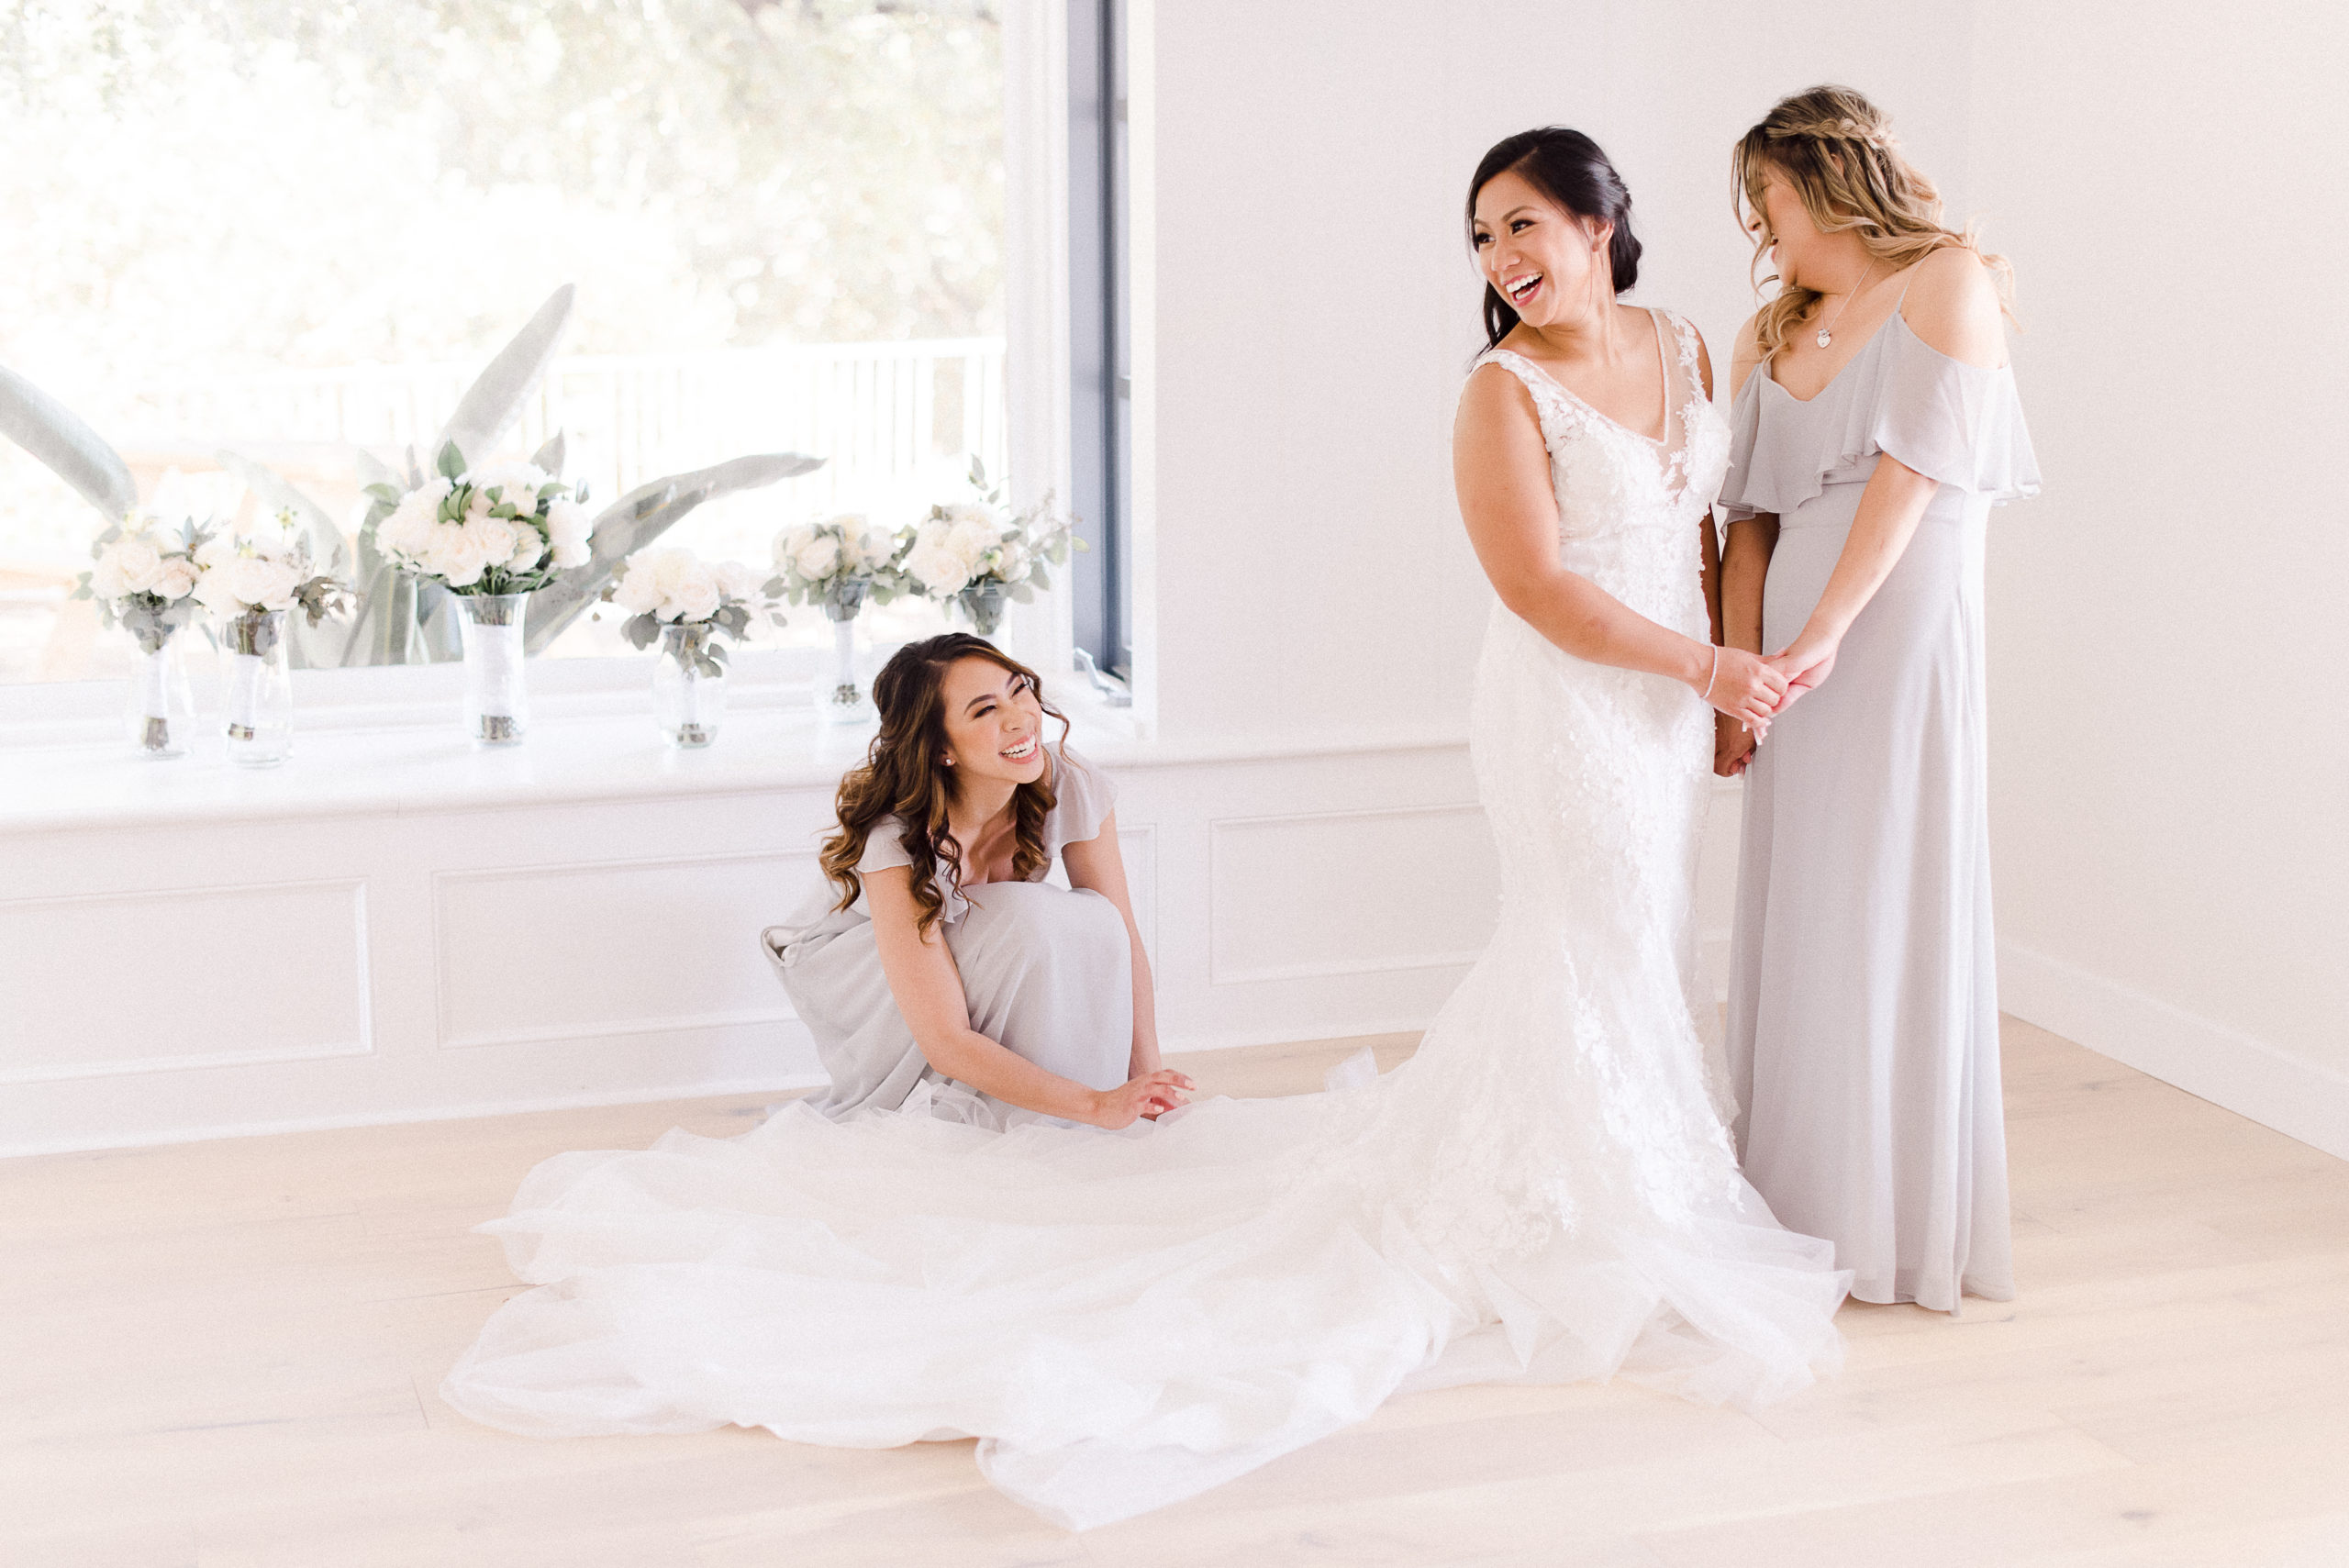 How to be the best maid of honor